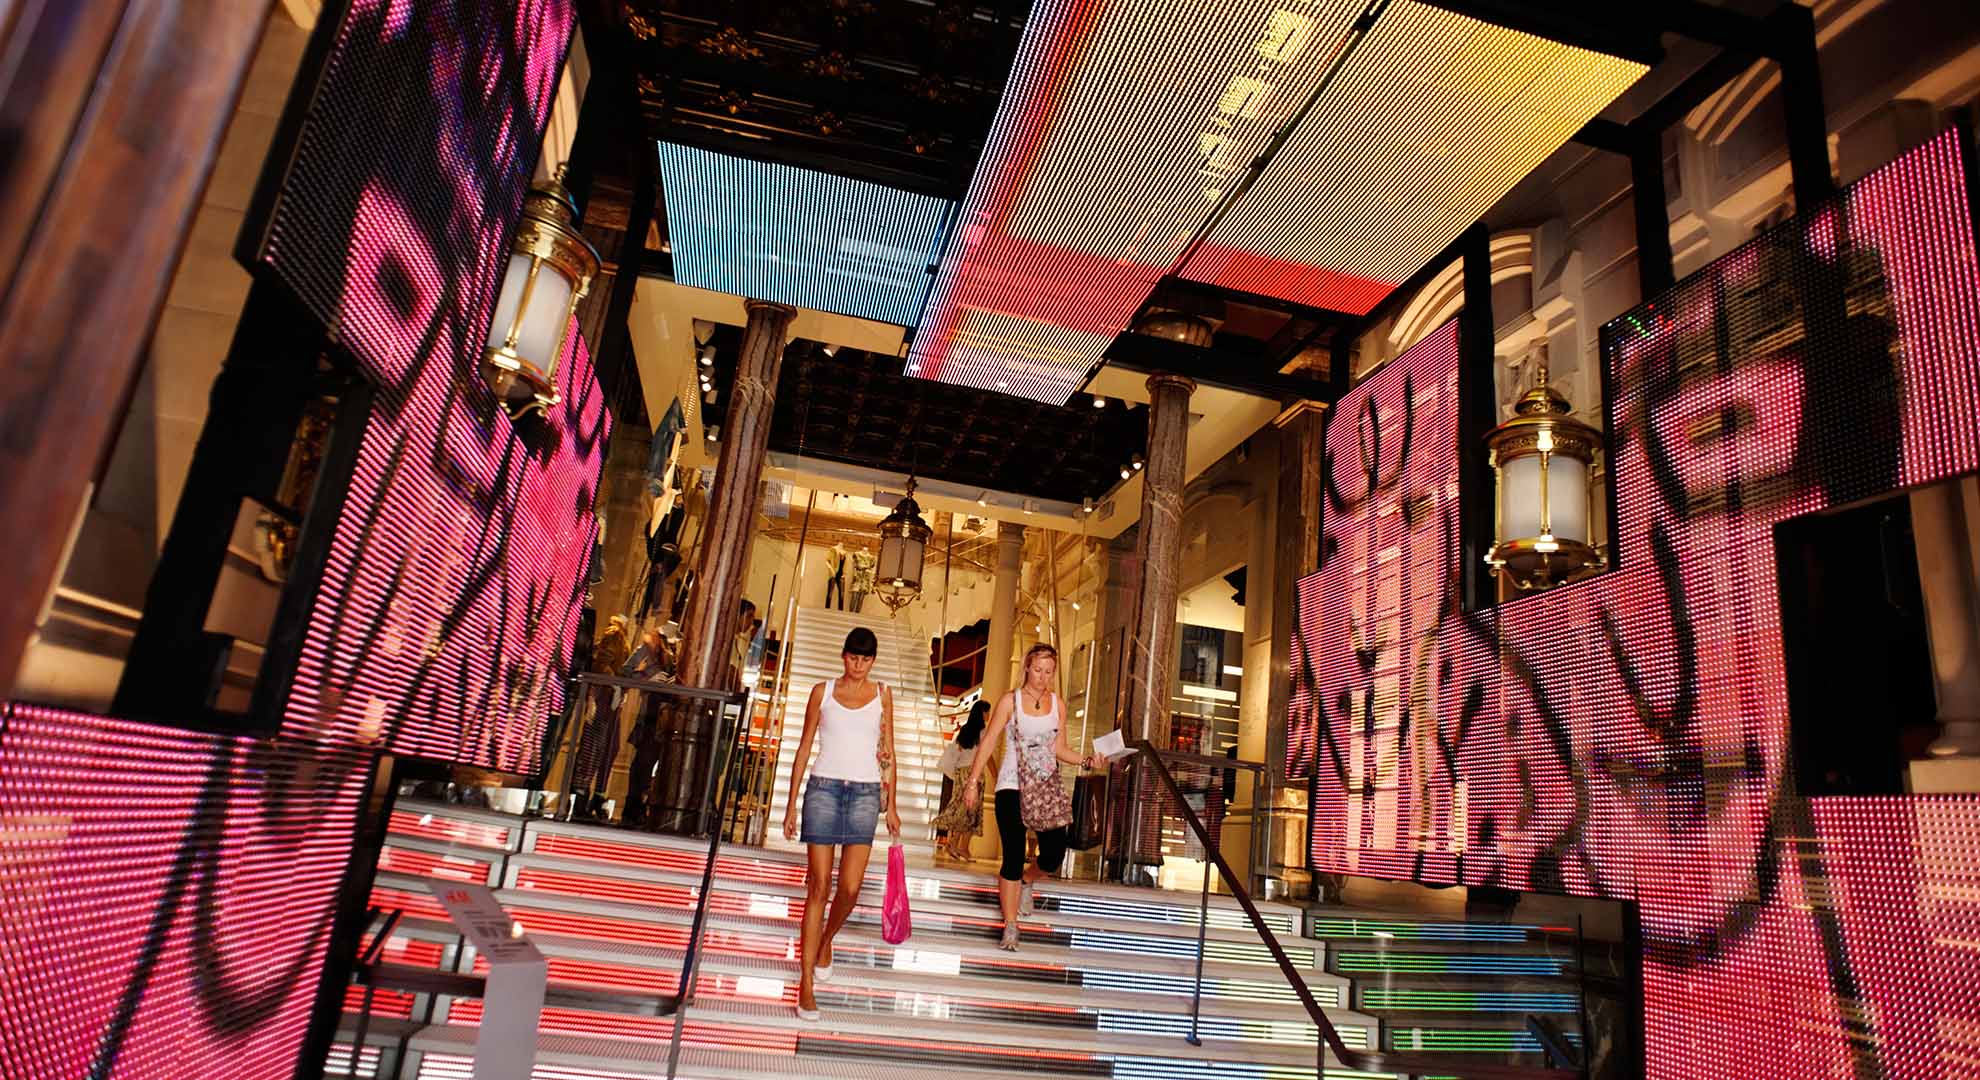 Entrance to H&M store in Barcelona, designed by Javier Mariscal. Alamy stock photo.